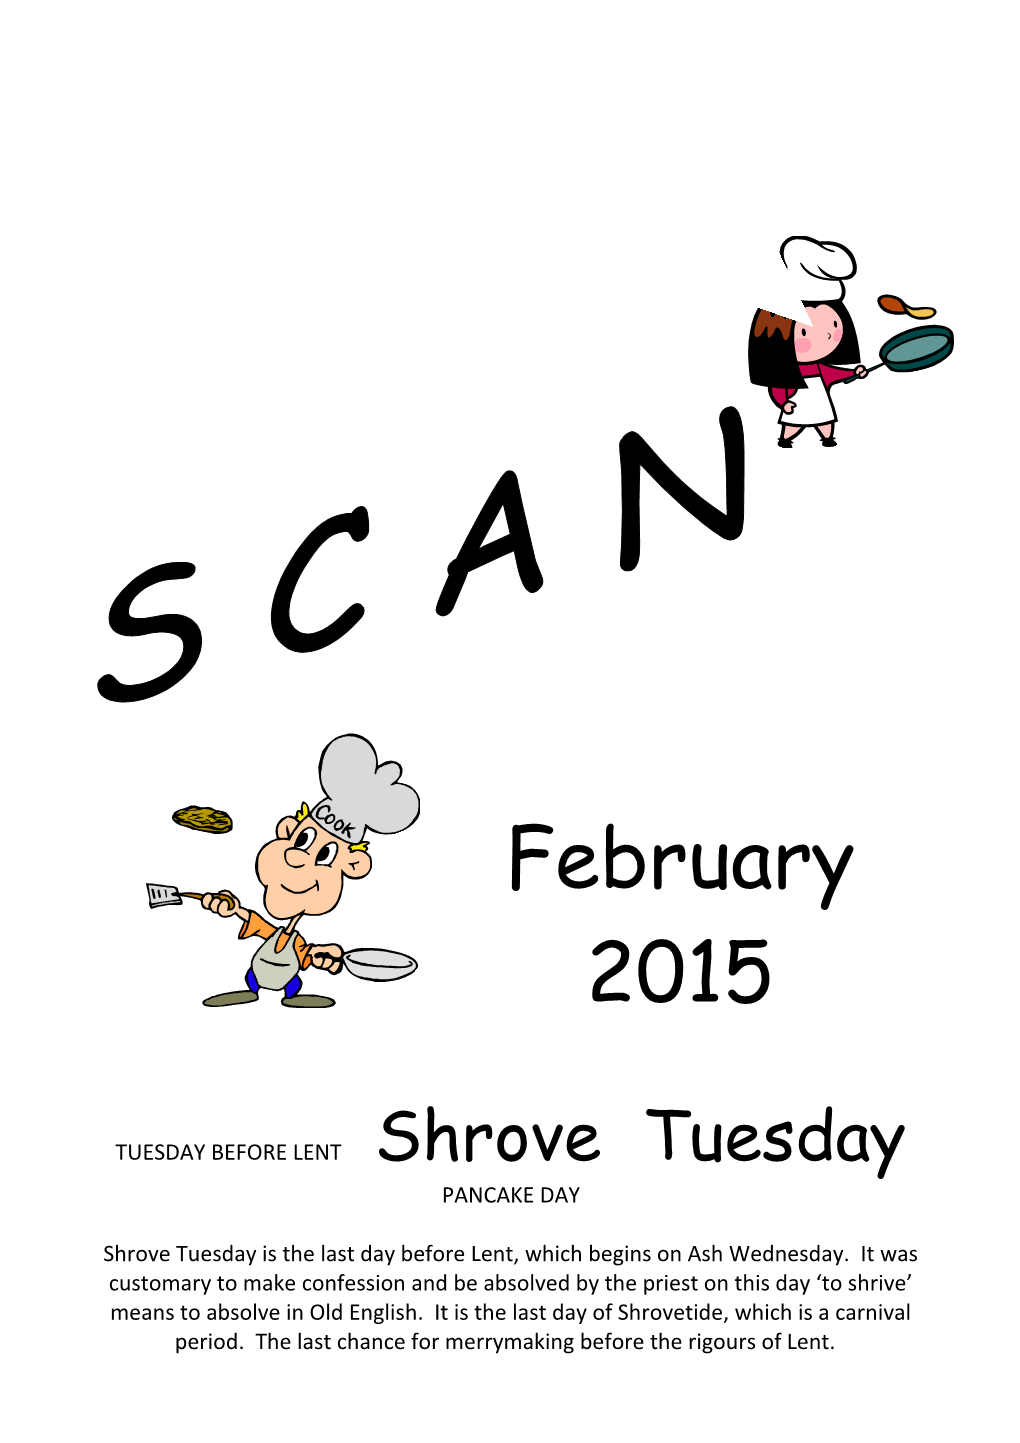 TUESDAY BEFORE LENT Shrove Tuesday PANCAKE DAY